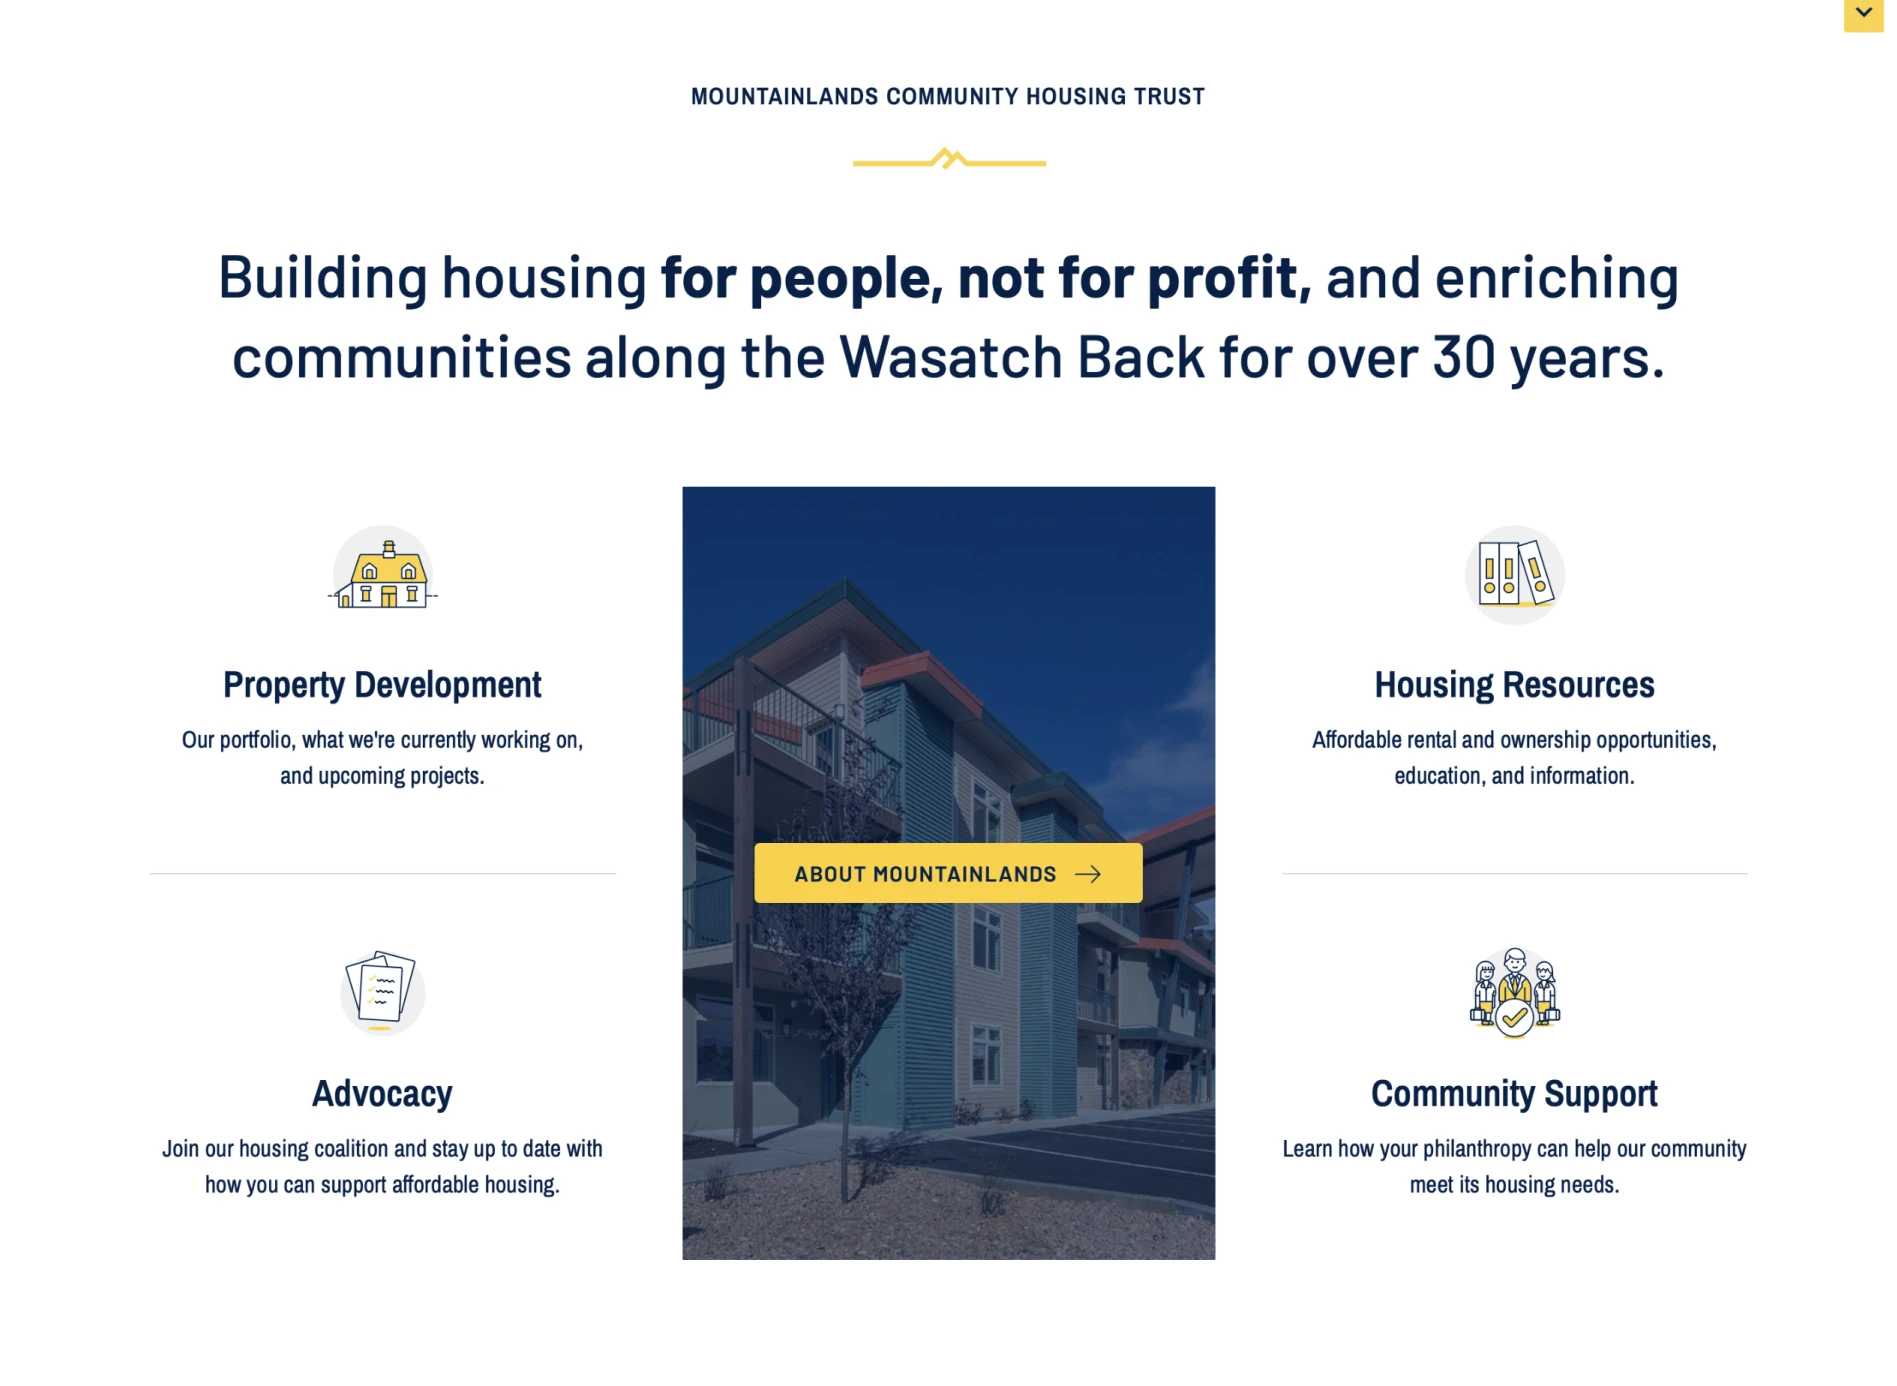 housing-for-people-not-profit